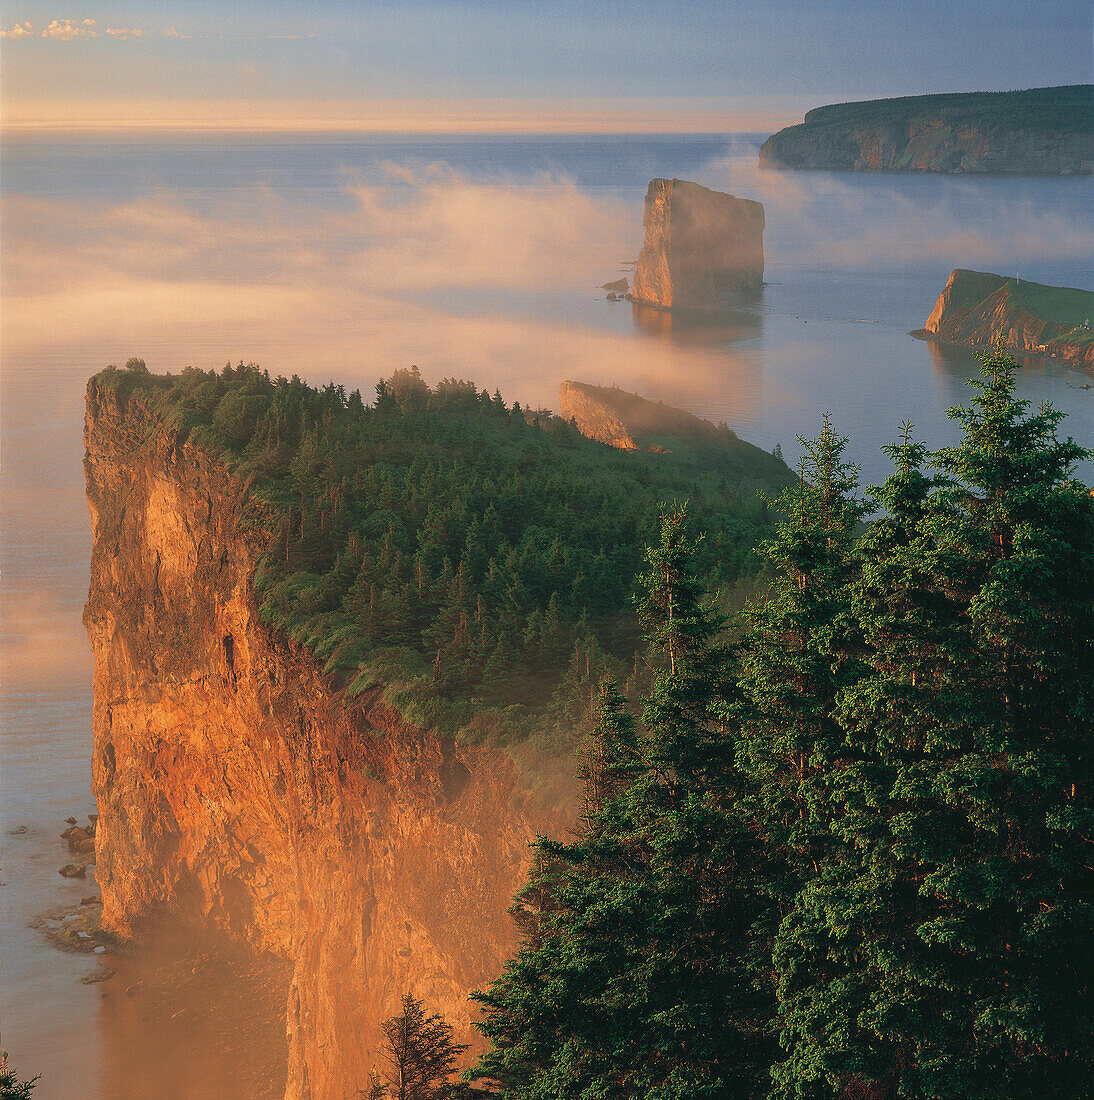 Perce Rock and the Three Sisters in Fog at Sunrise, Gaspe Peninsula, Quebec